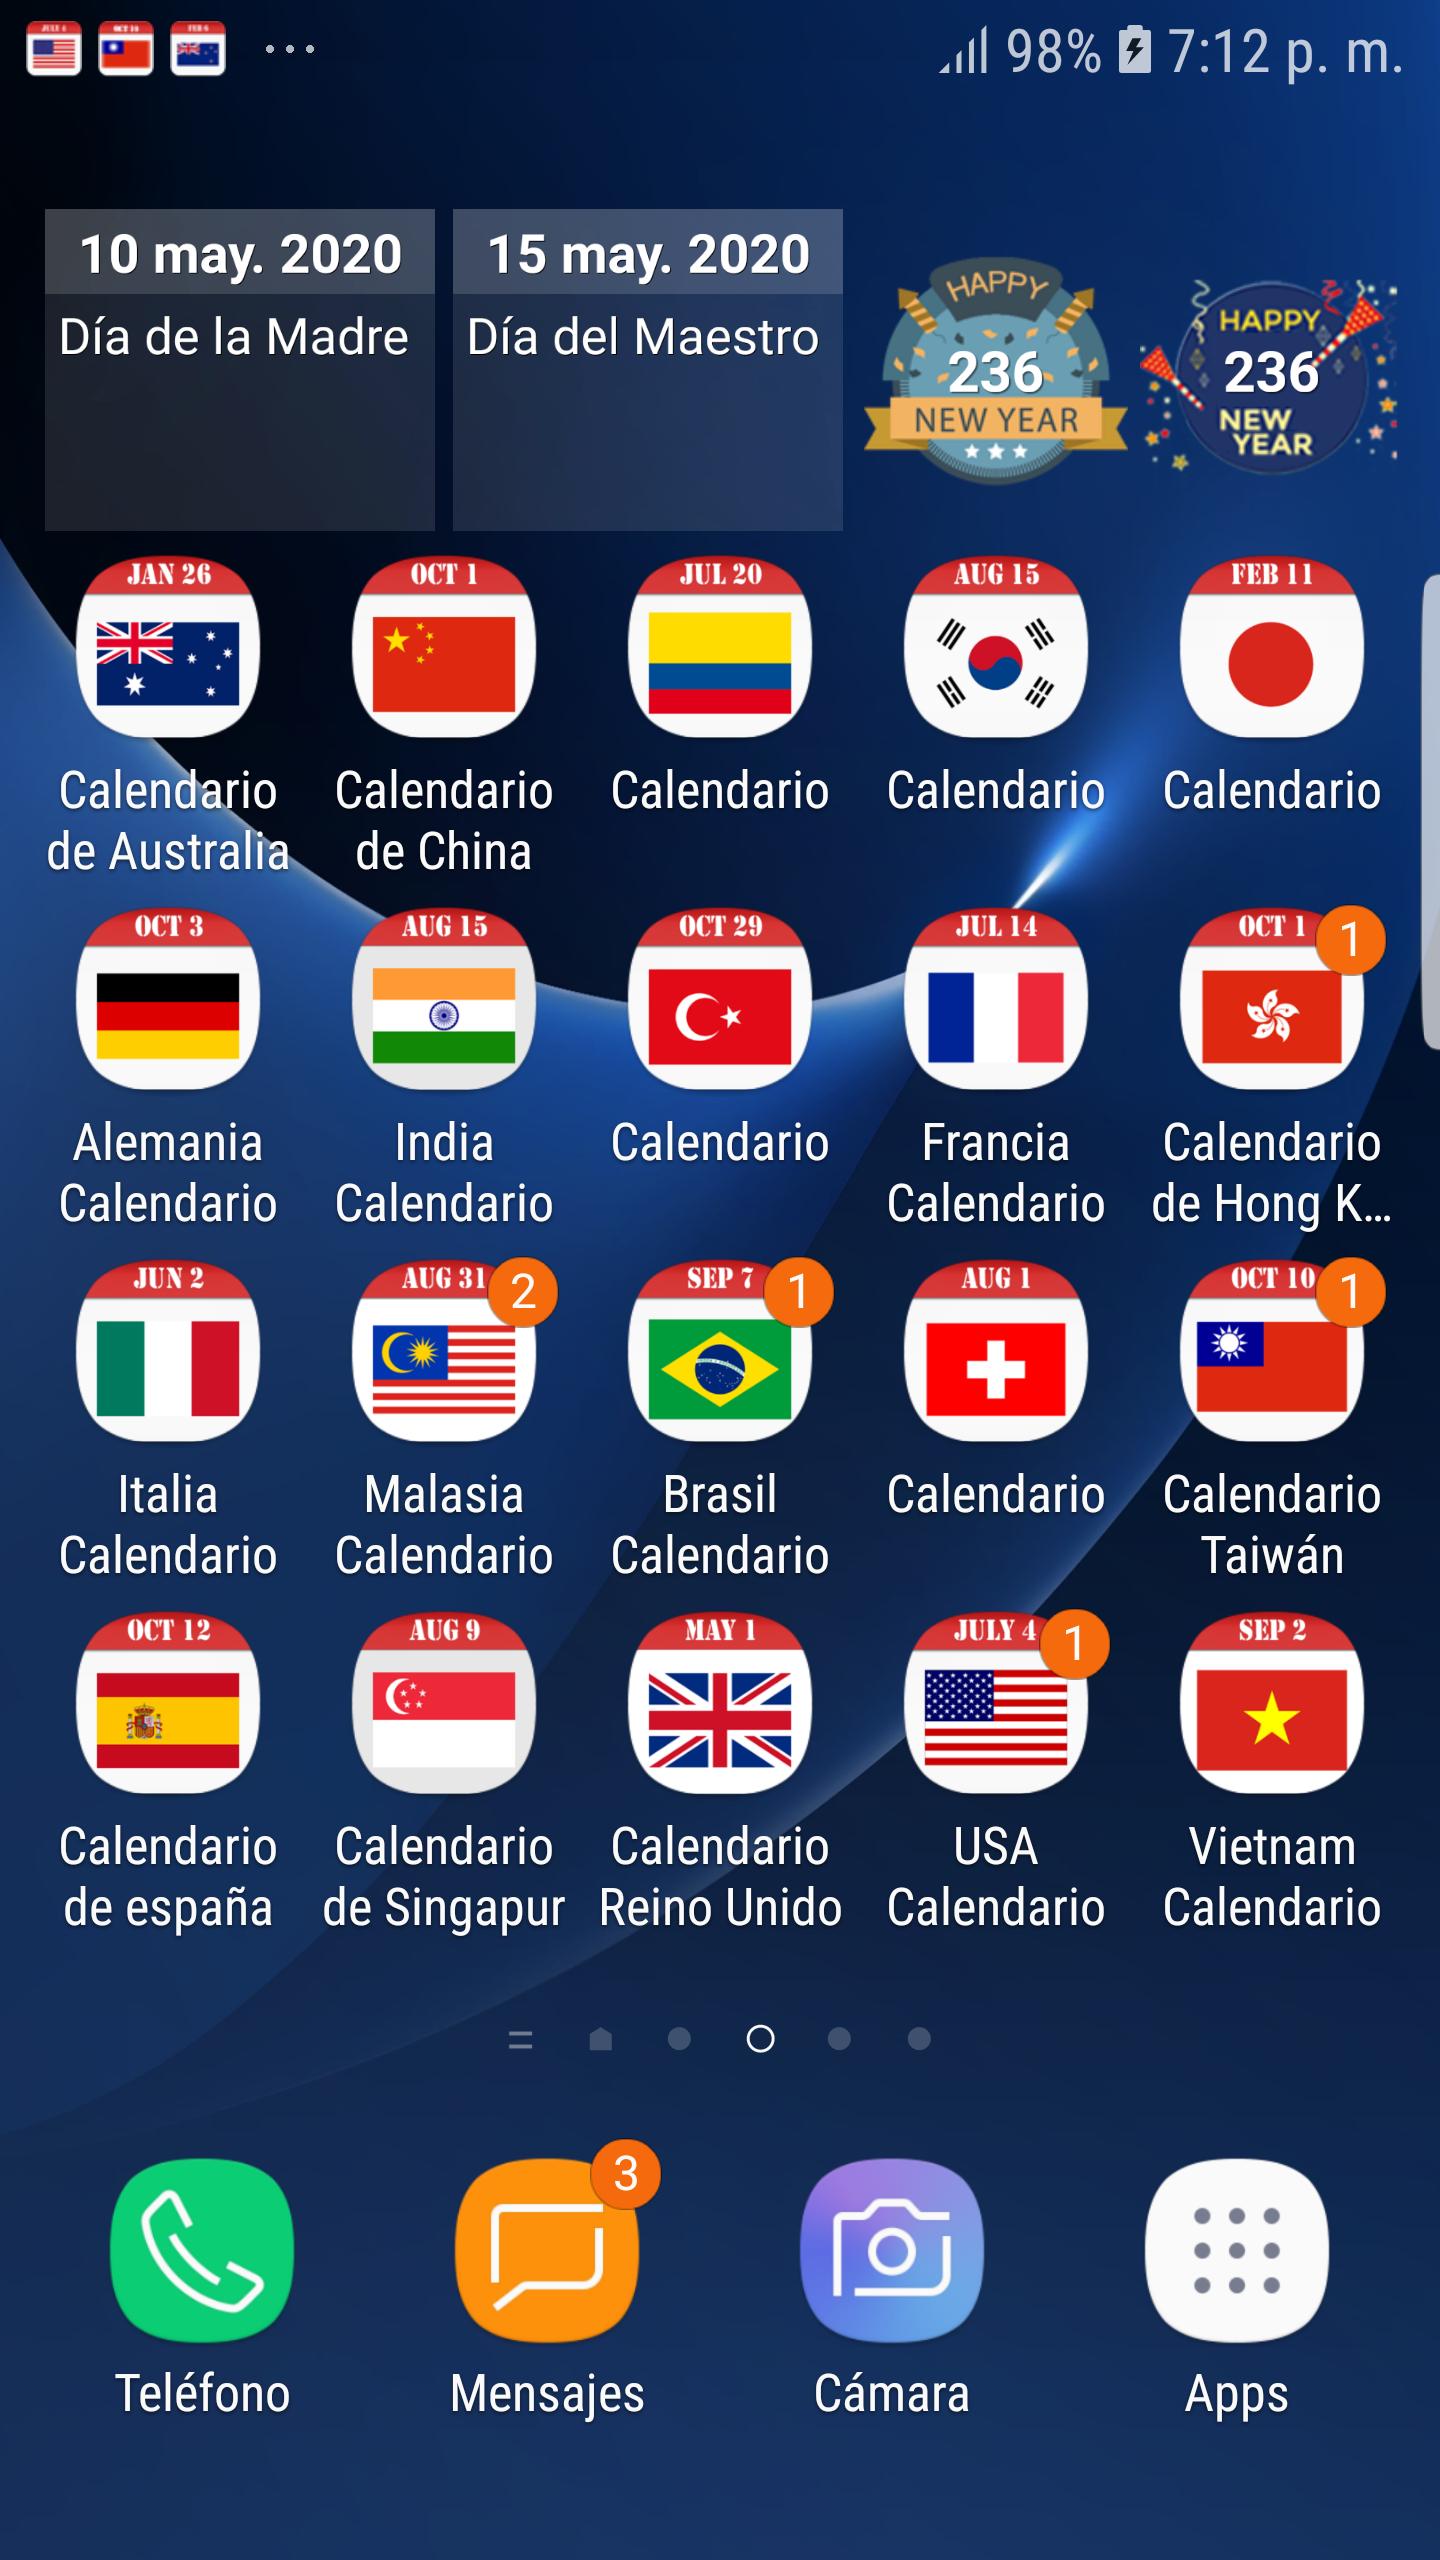 Colombia Calendar 2020 And 2021 For Android Apk Download - may calendar roblox